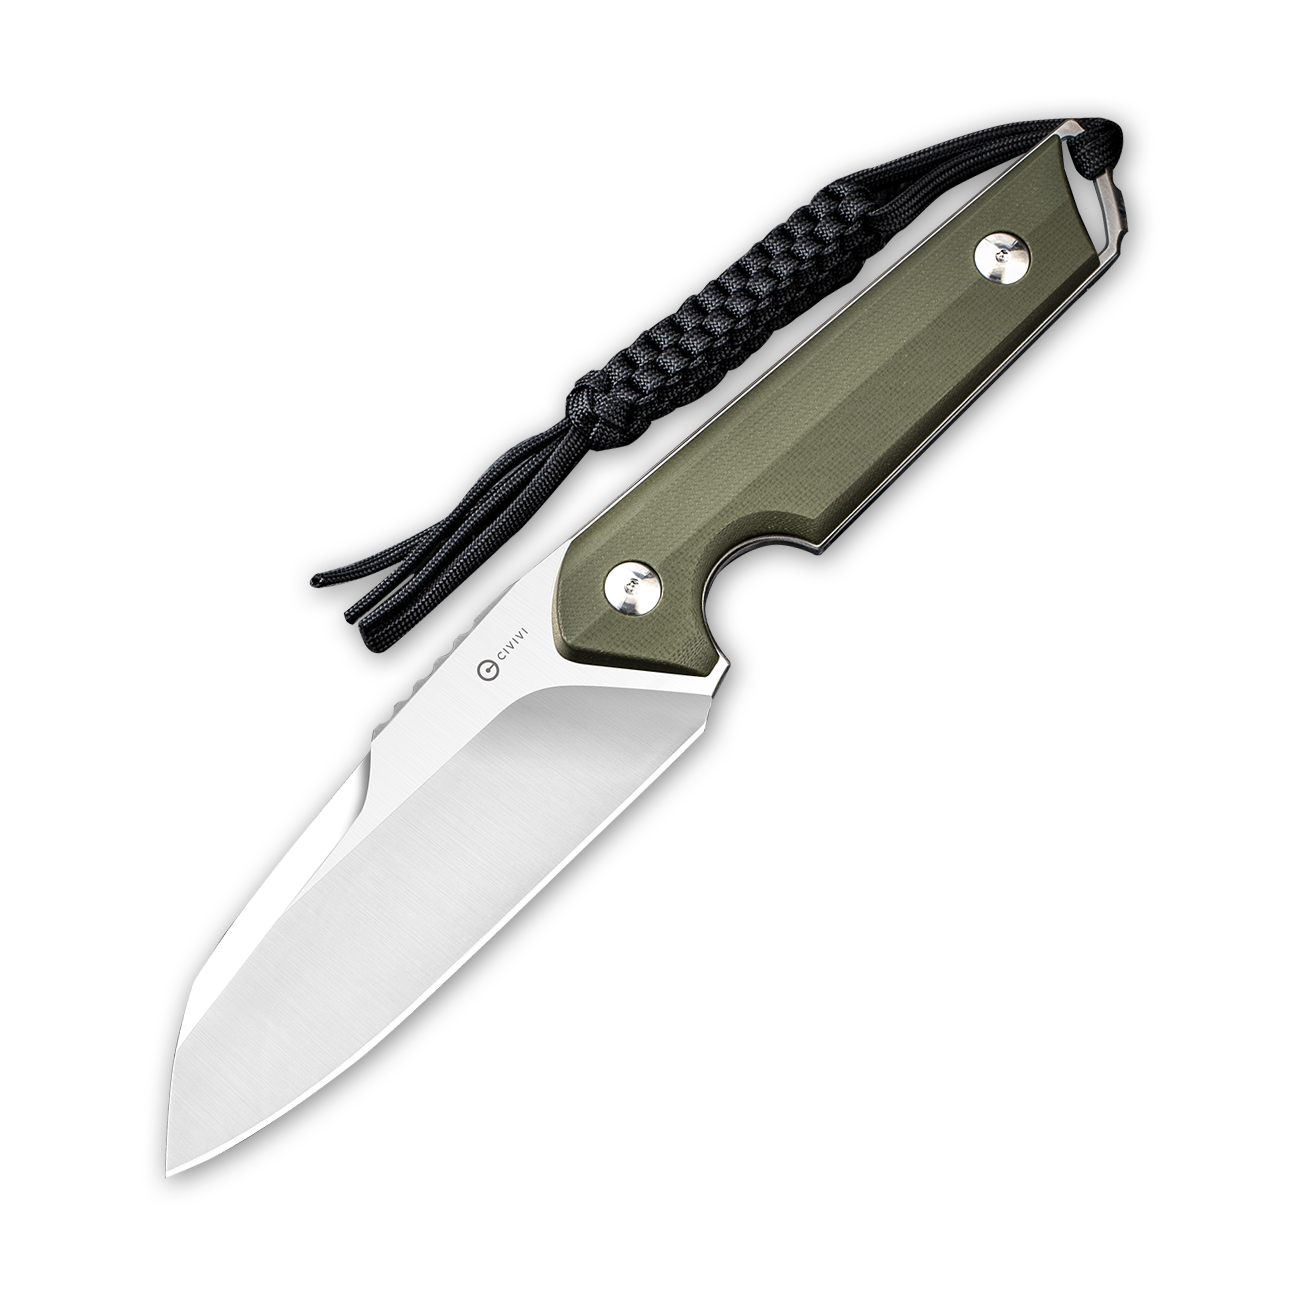 CIVIVI Kepler Fixed Blade C2109A Knife 9Cr18MoV Stainless Steel & OD Green G10 Hunting Knives